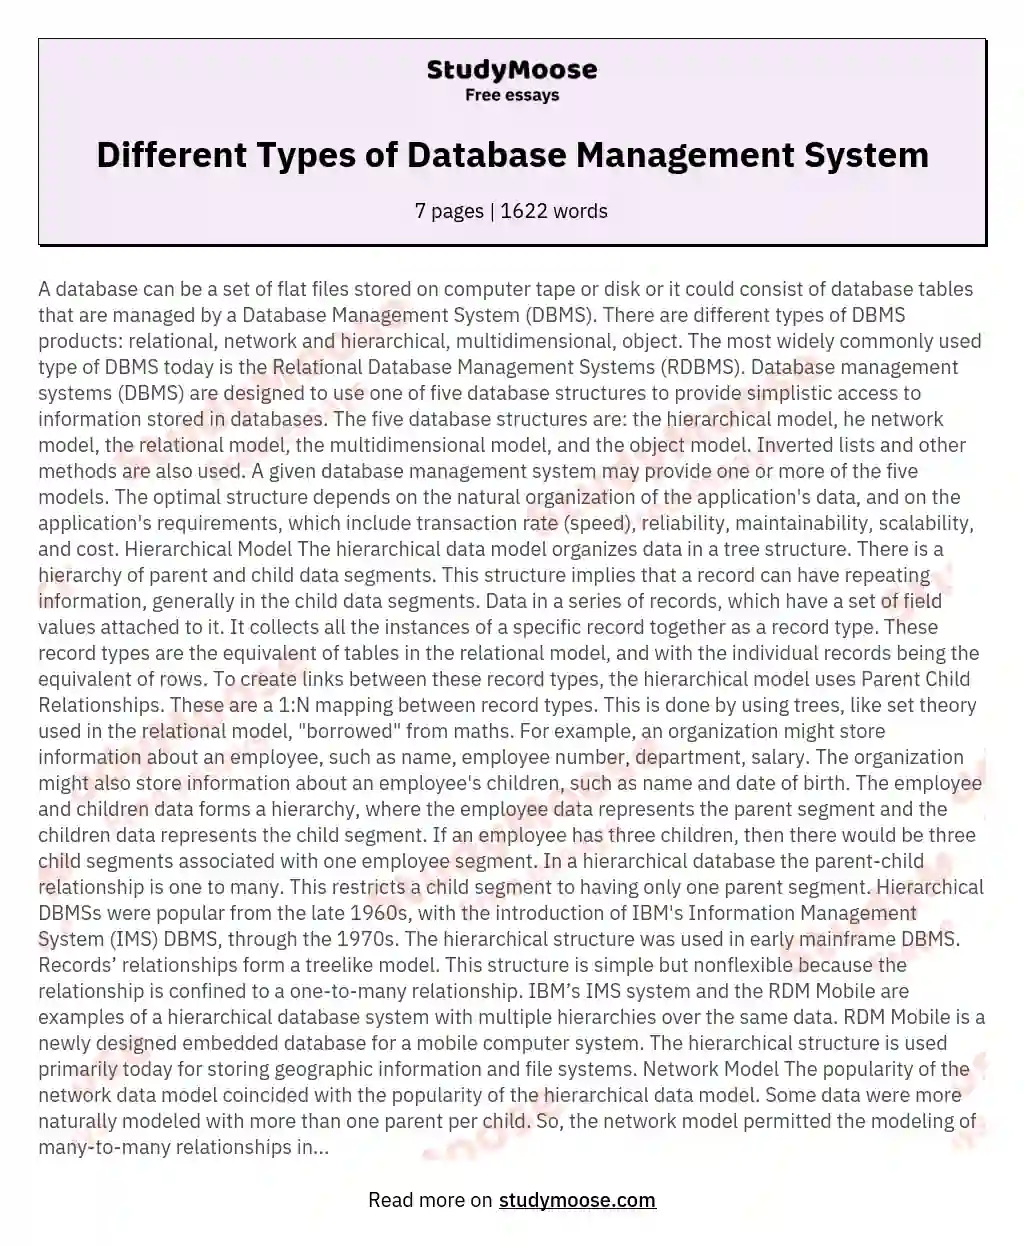 Different Types of Database Management System essay